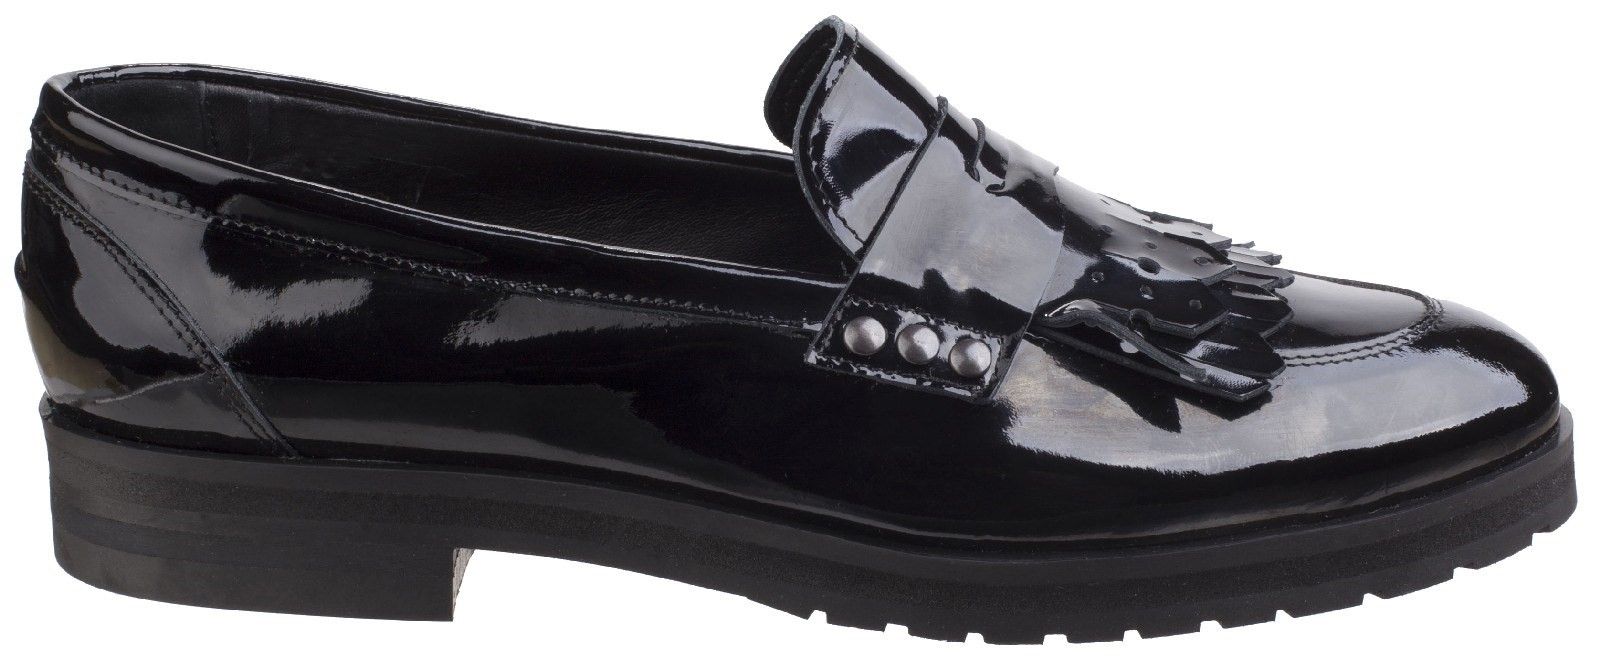 Riva brings in a twist to the traditional loafer design. A tailored layered fringe, metallic studs and chunky sole give that added edge to a classic style. Crafted with a luxury leather upper. 
Neat apron toe styled front. 
Dual layered perforated leather fringe detail. 
Leather overlay strap with stylish metallic studs feature. 
Full leather lining and foot bed.